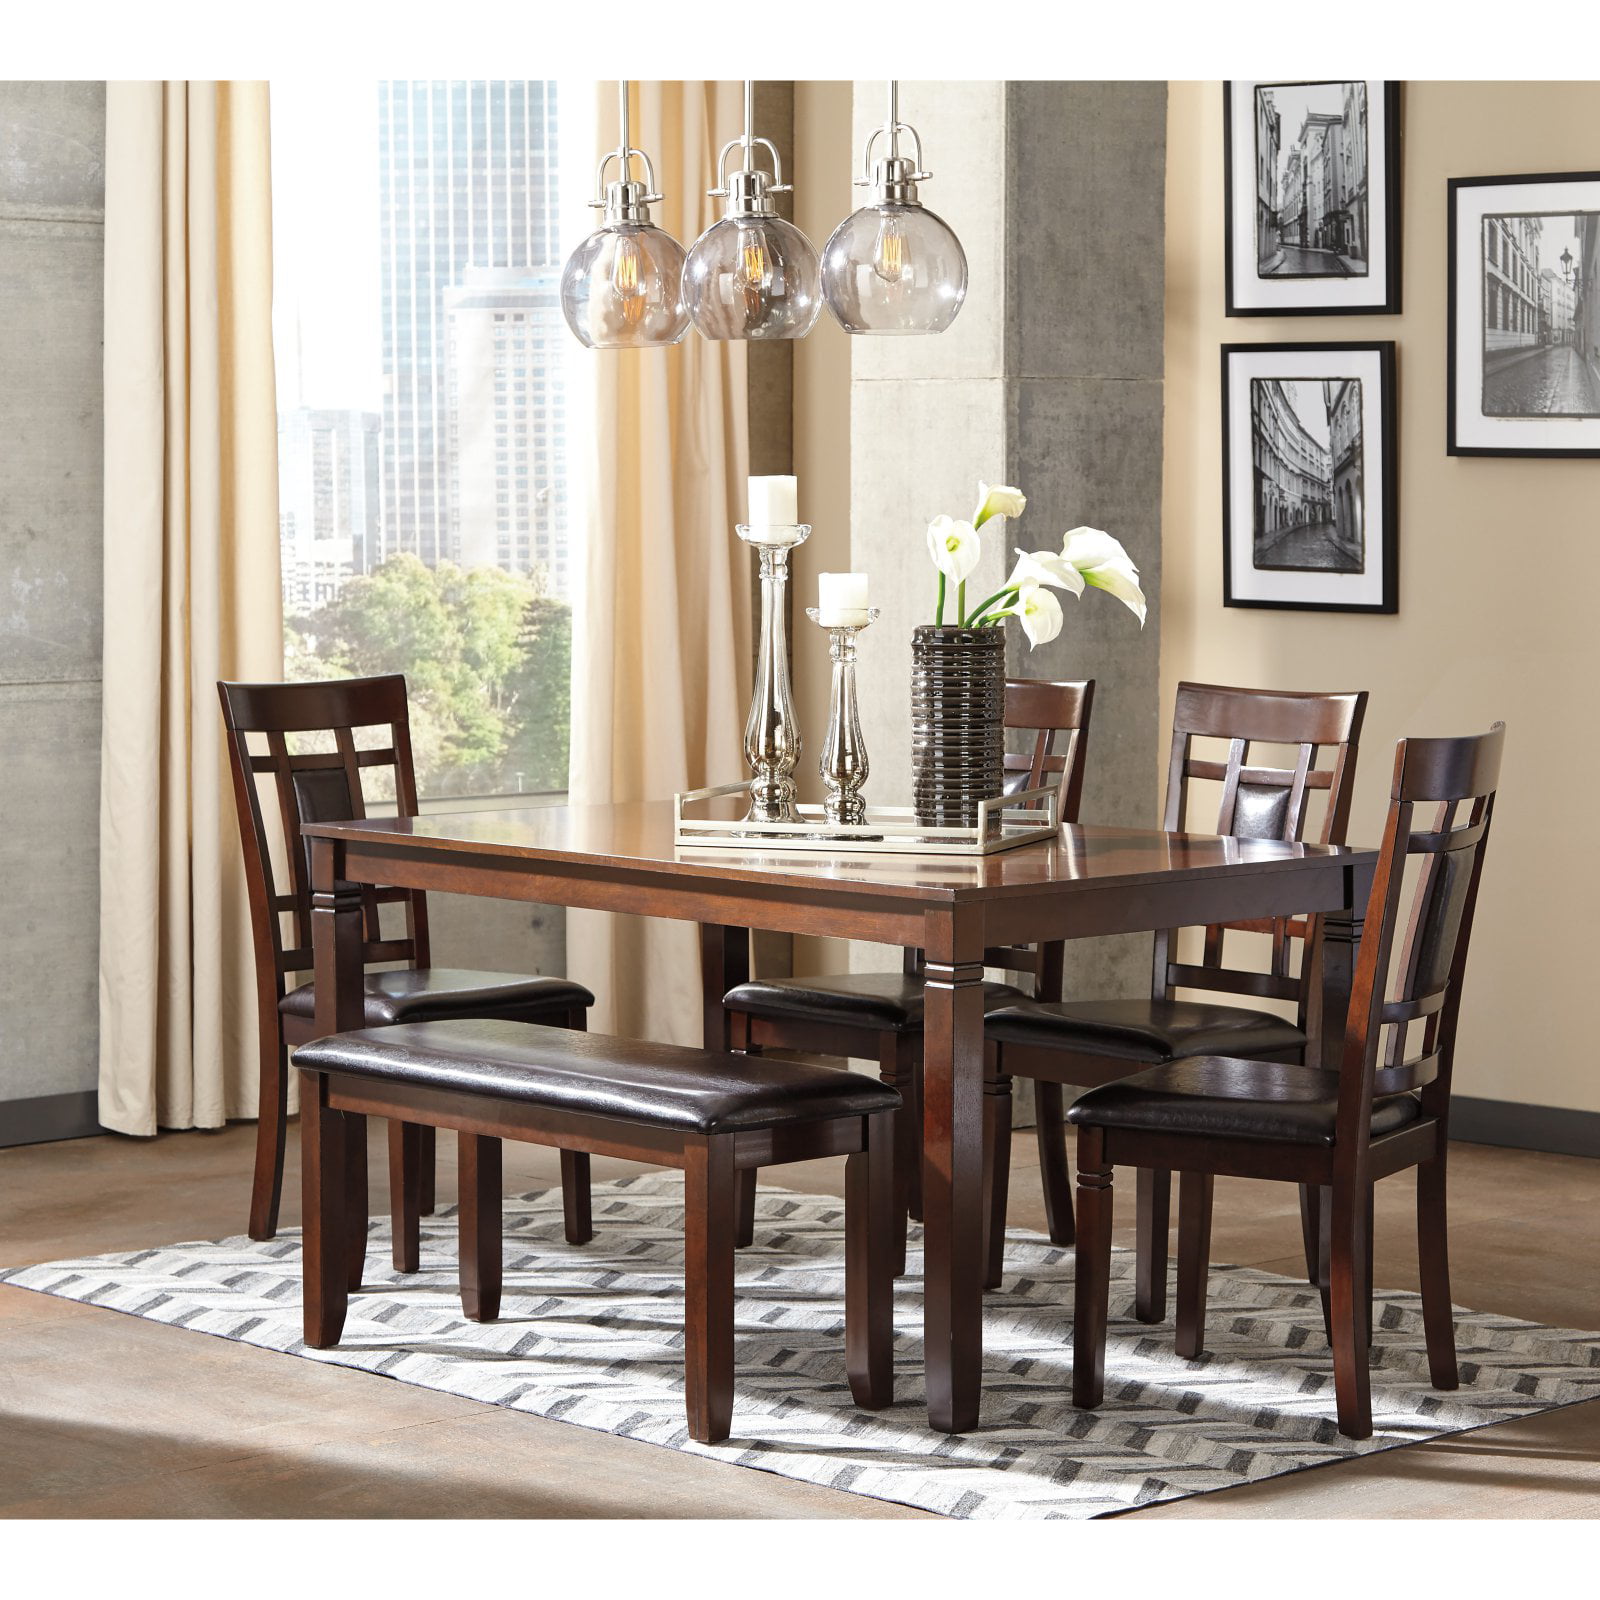 Ashley Bennox 6 Piece Dining Table Set, Large Dining Room Table And Chairs